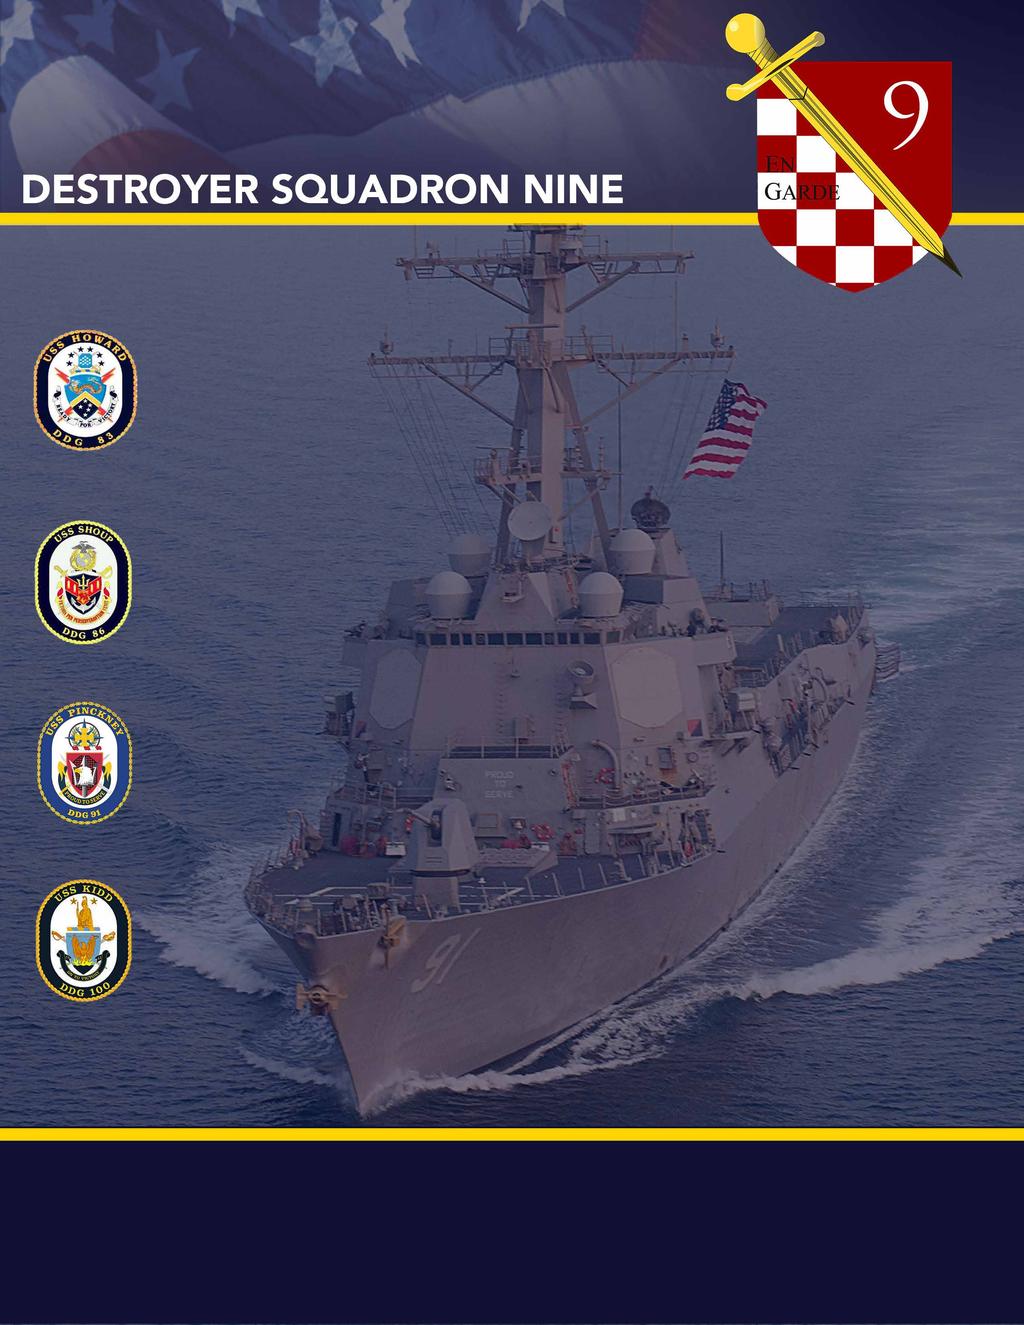 USS Howard (DDG 83) The Arleigh Burke-class destroyer USS Howard (DDG 83) namesake is Medal of Honor recipient Marine Corps First Sergeant Jimmie E.